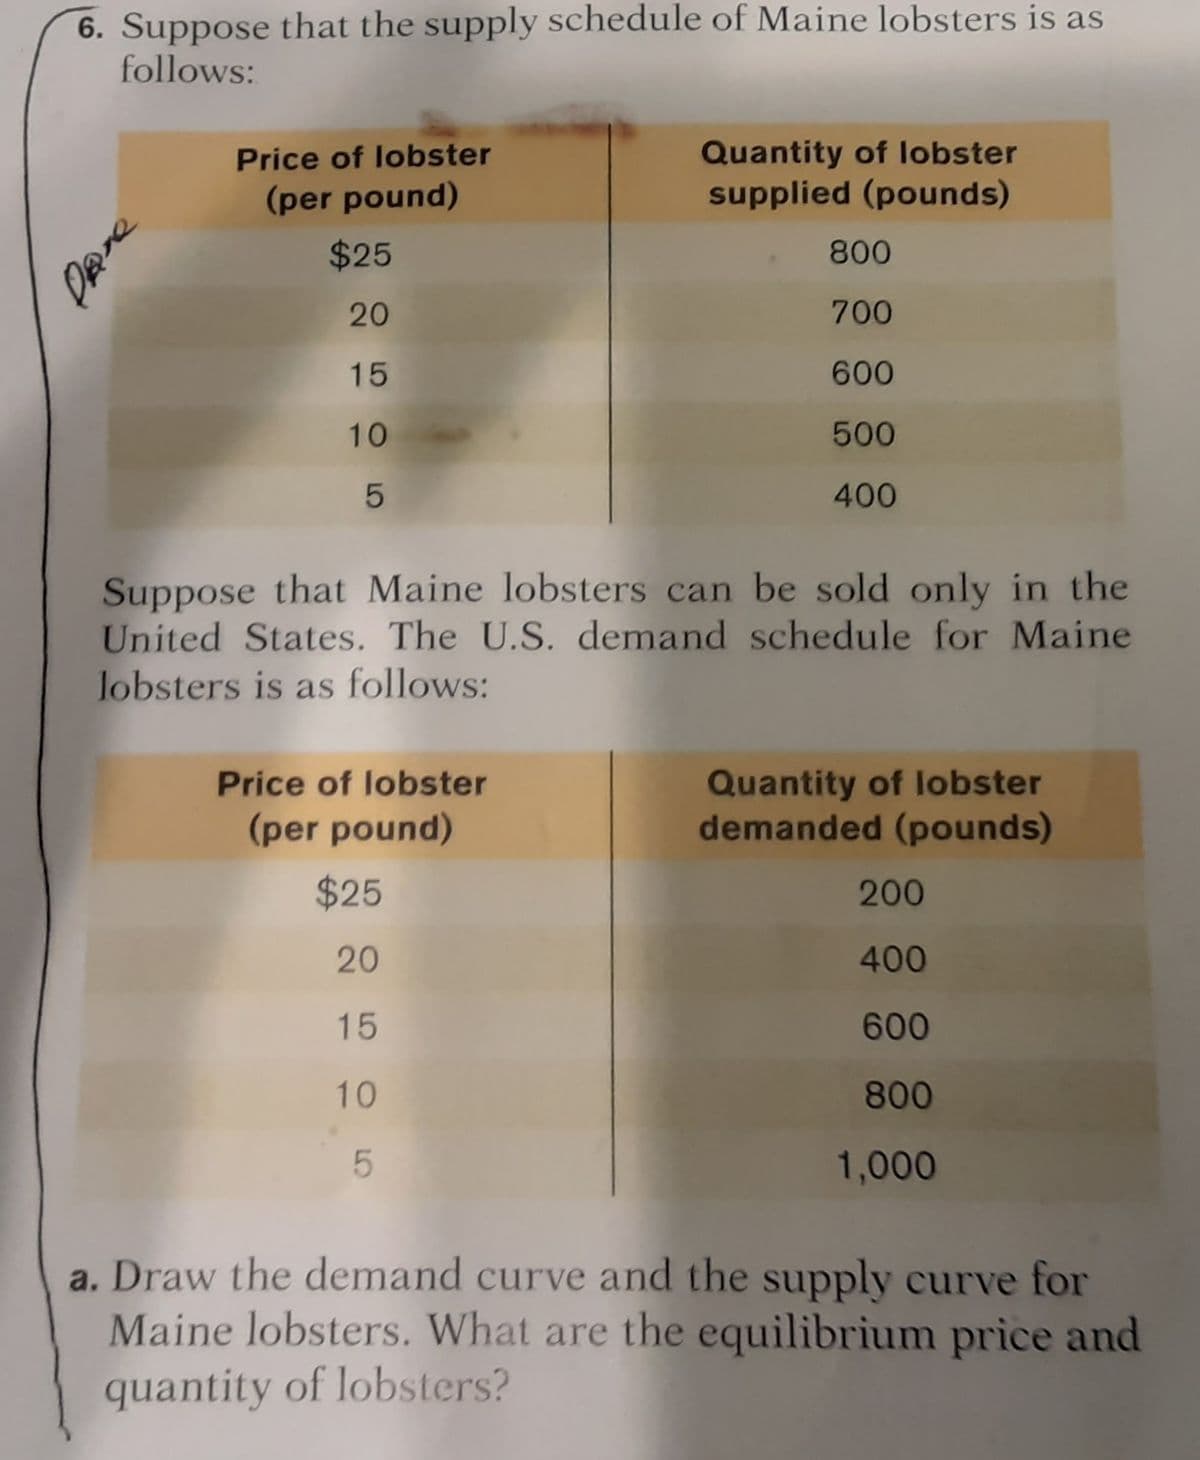 6. Suppose that the supply schedule of Maine lobsters is as
follows:
Quantity of lobster
supplied (pounds)
Price of lobster
(per pound)
$25
800
20
700
15
600
10
500
400
Suppose that Maine lobsters can be sold only in the
United States. The U.S. demand schedule for Maine
lobsters is as follows:
Quantity of Ilobster
demanded (pounds)
Price of lobster
(per pound)
$25
200
20
400
15
600
10
800
1,000
a. Draw the demand curve and the supply curve for
Maine lobsters. What are the equilibrium price and
quantity of lobsters?
